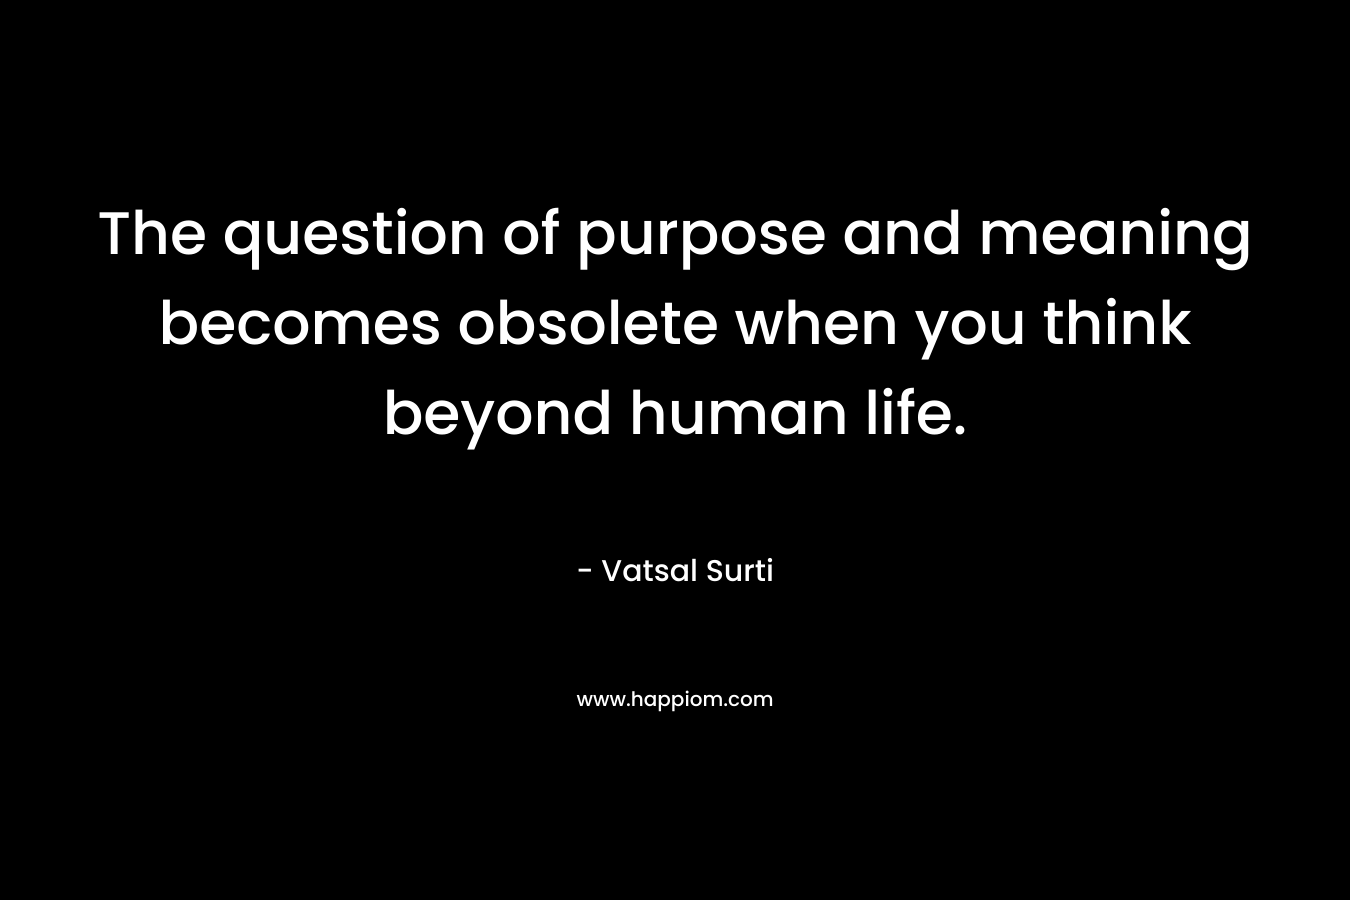 The question of purpose and meaning becomes obsolete when you think beyond human life. – Vatsal Surti